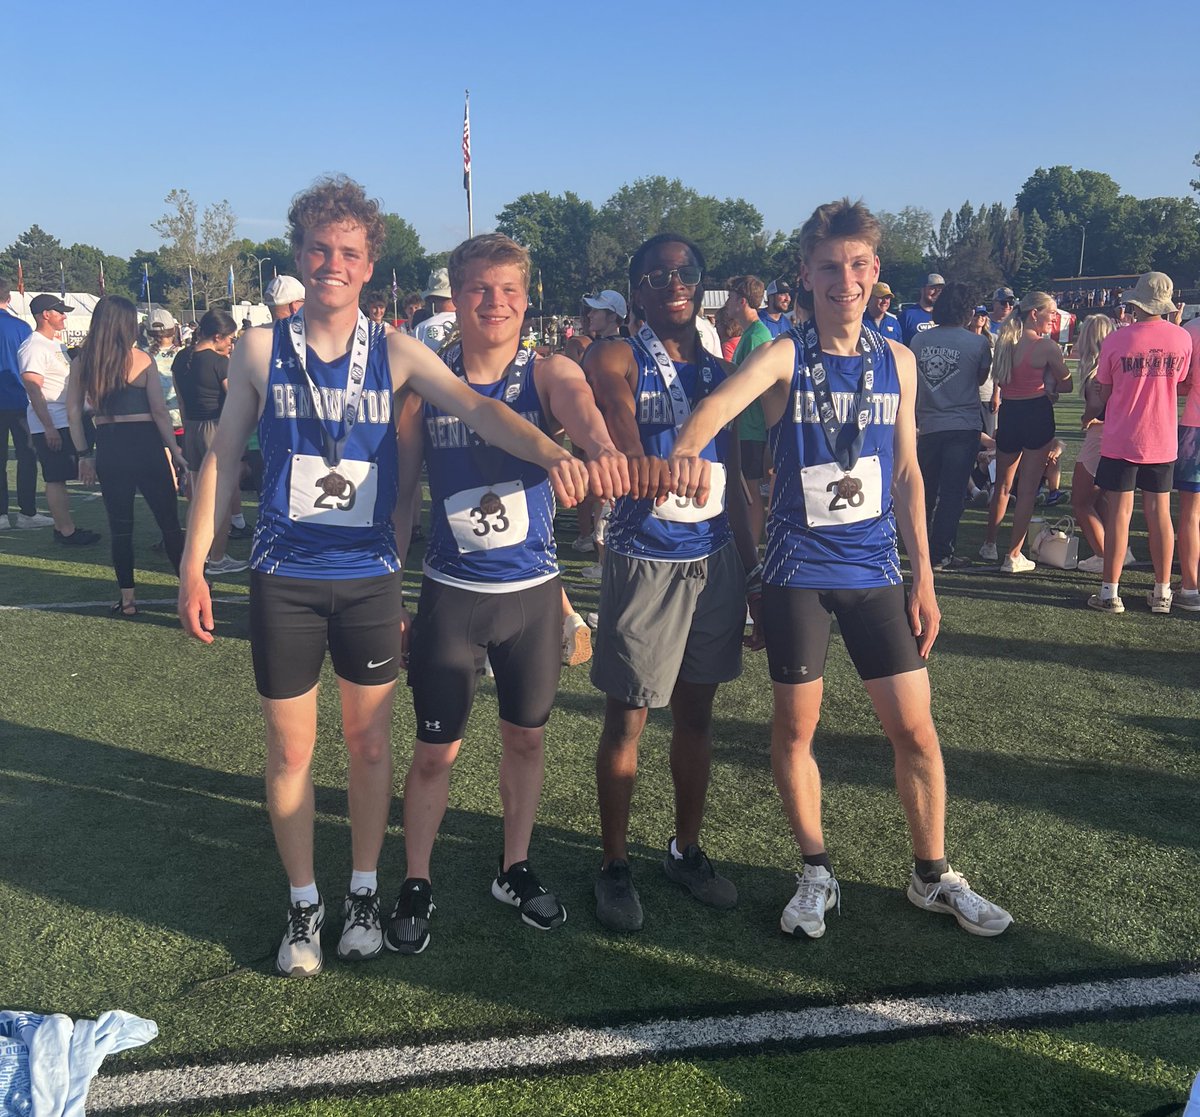 To cap off the day, Cameron, Colin, KJ, and Carter not only medaled with a 7th place finish in the 4x400, but set the school record as well! From Heat #1!!! They battled hard to earn that medal and school record. Congrats to this group! 3:25.68 #finishstrong